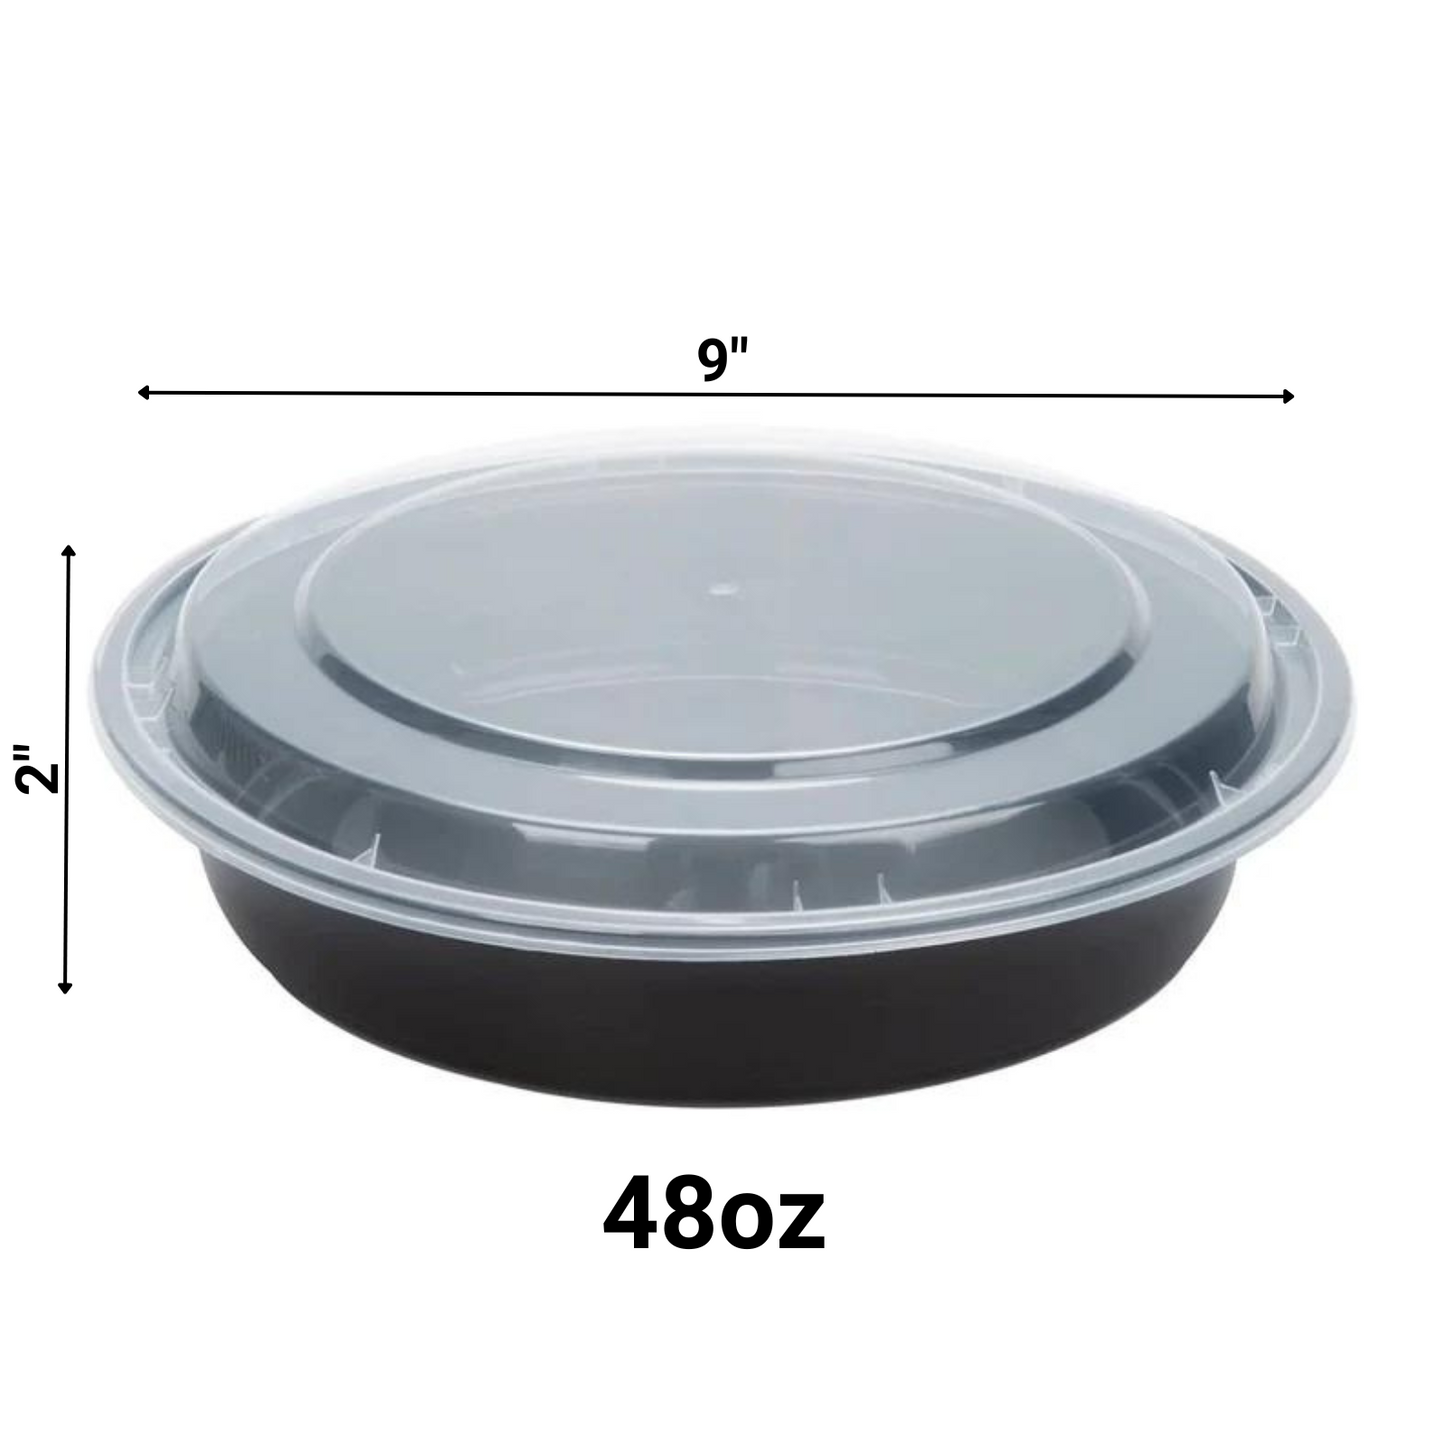 *BULK*  48oz Black Meal Prep/ Bento Box Disposable Container with Clear Lid Food Storage & Serving VeZee   